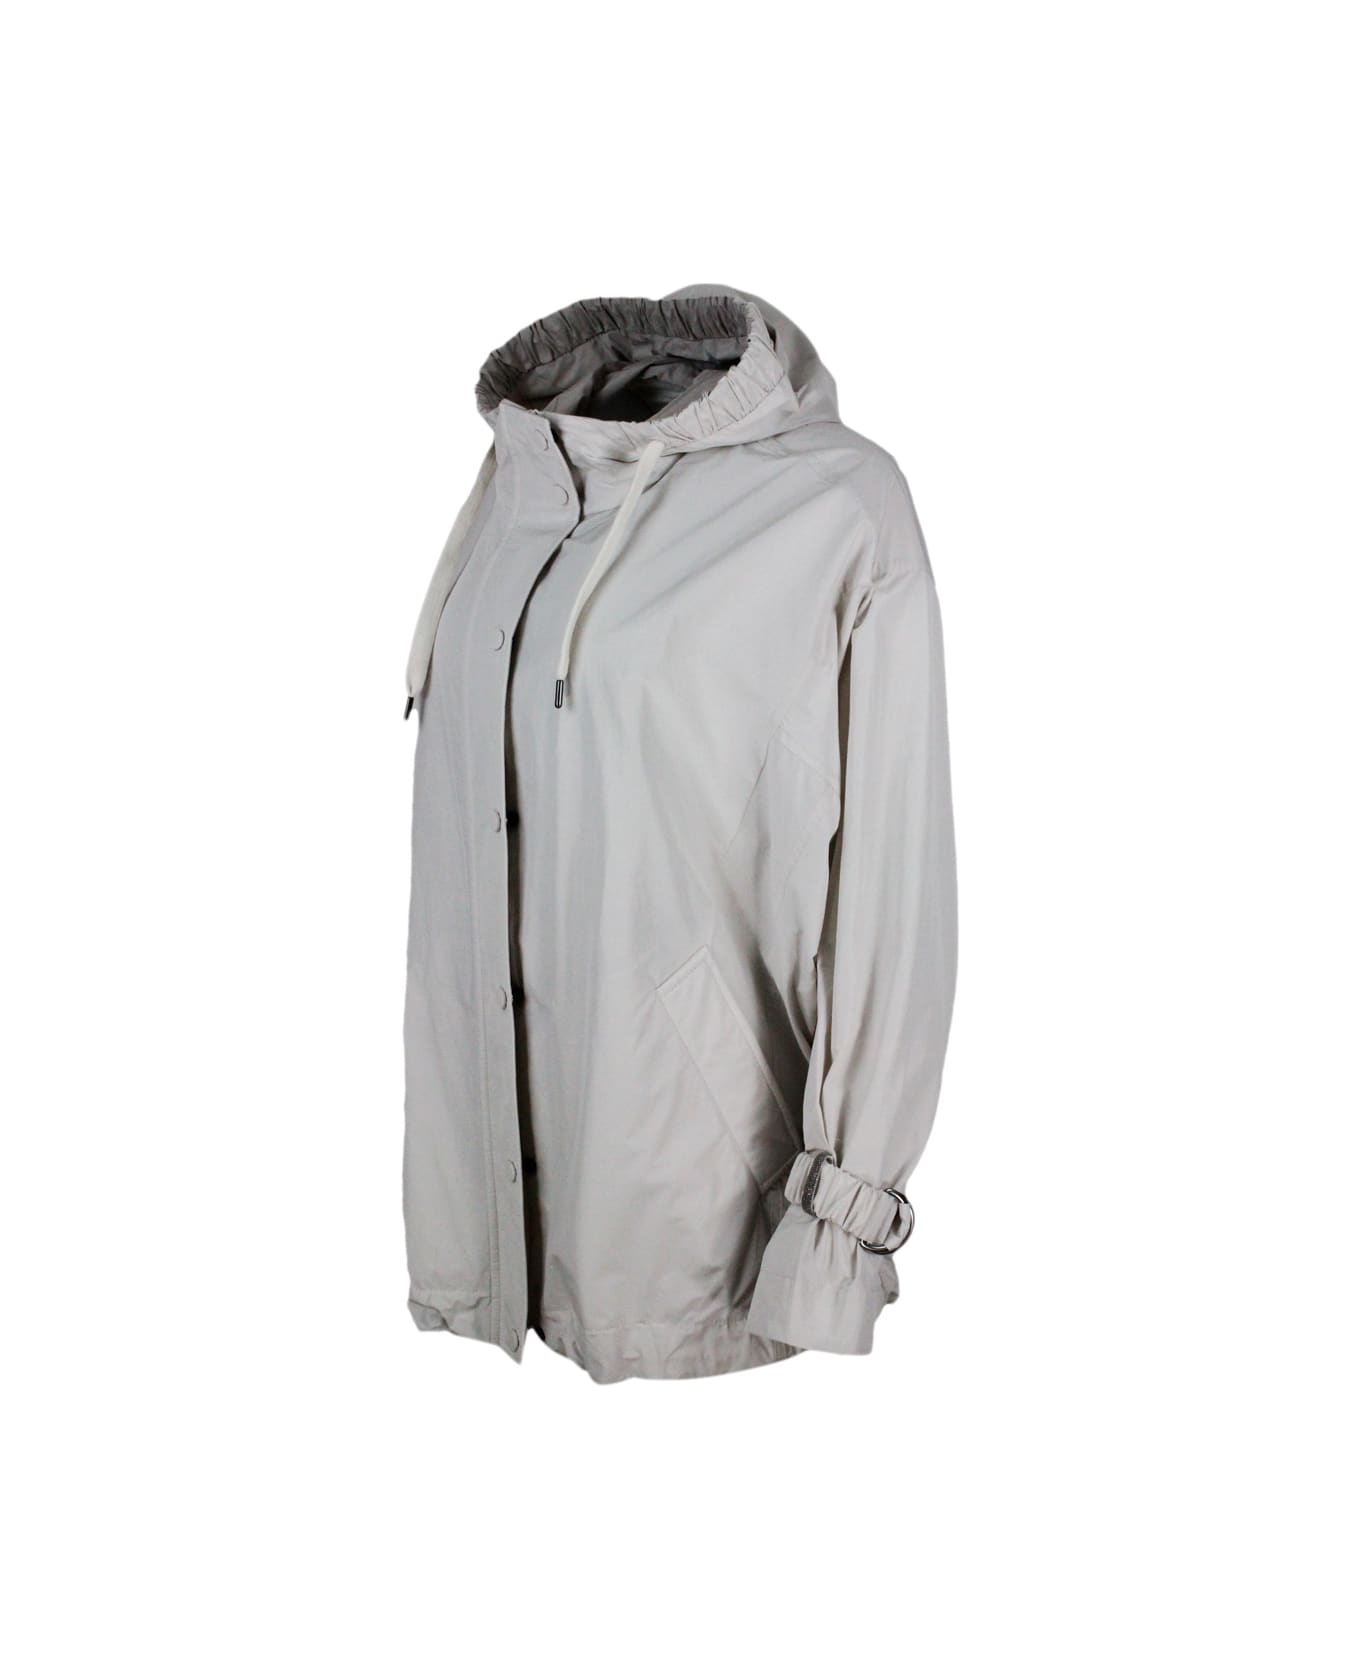 Brunello Cucinelli Water Resistant Outerware Jacket With Hood And Drawstring Hem. Curl On The Sleeve With Precious Jewel - Grey Plaster